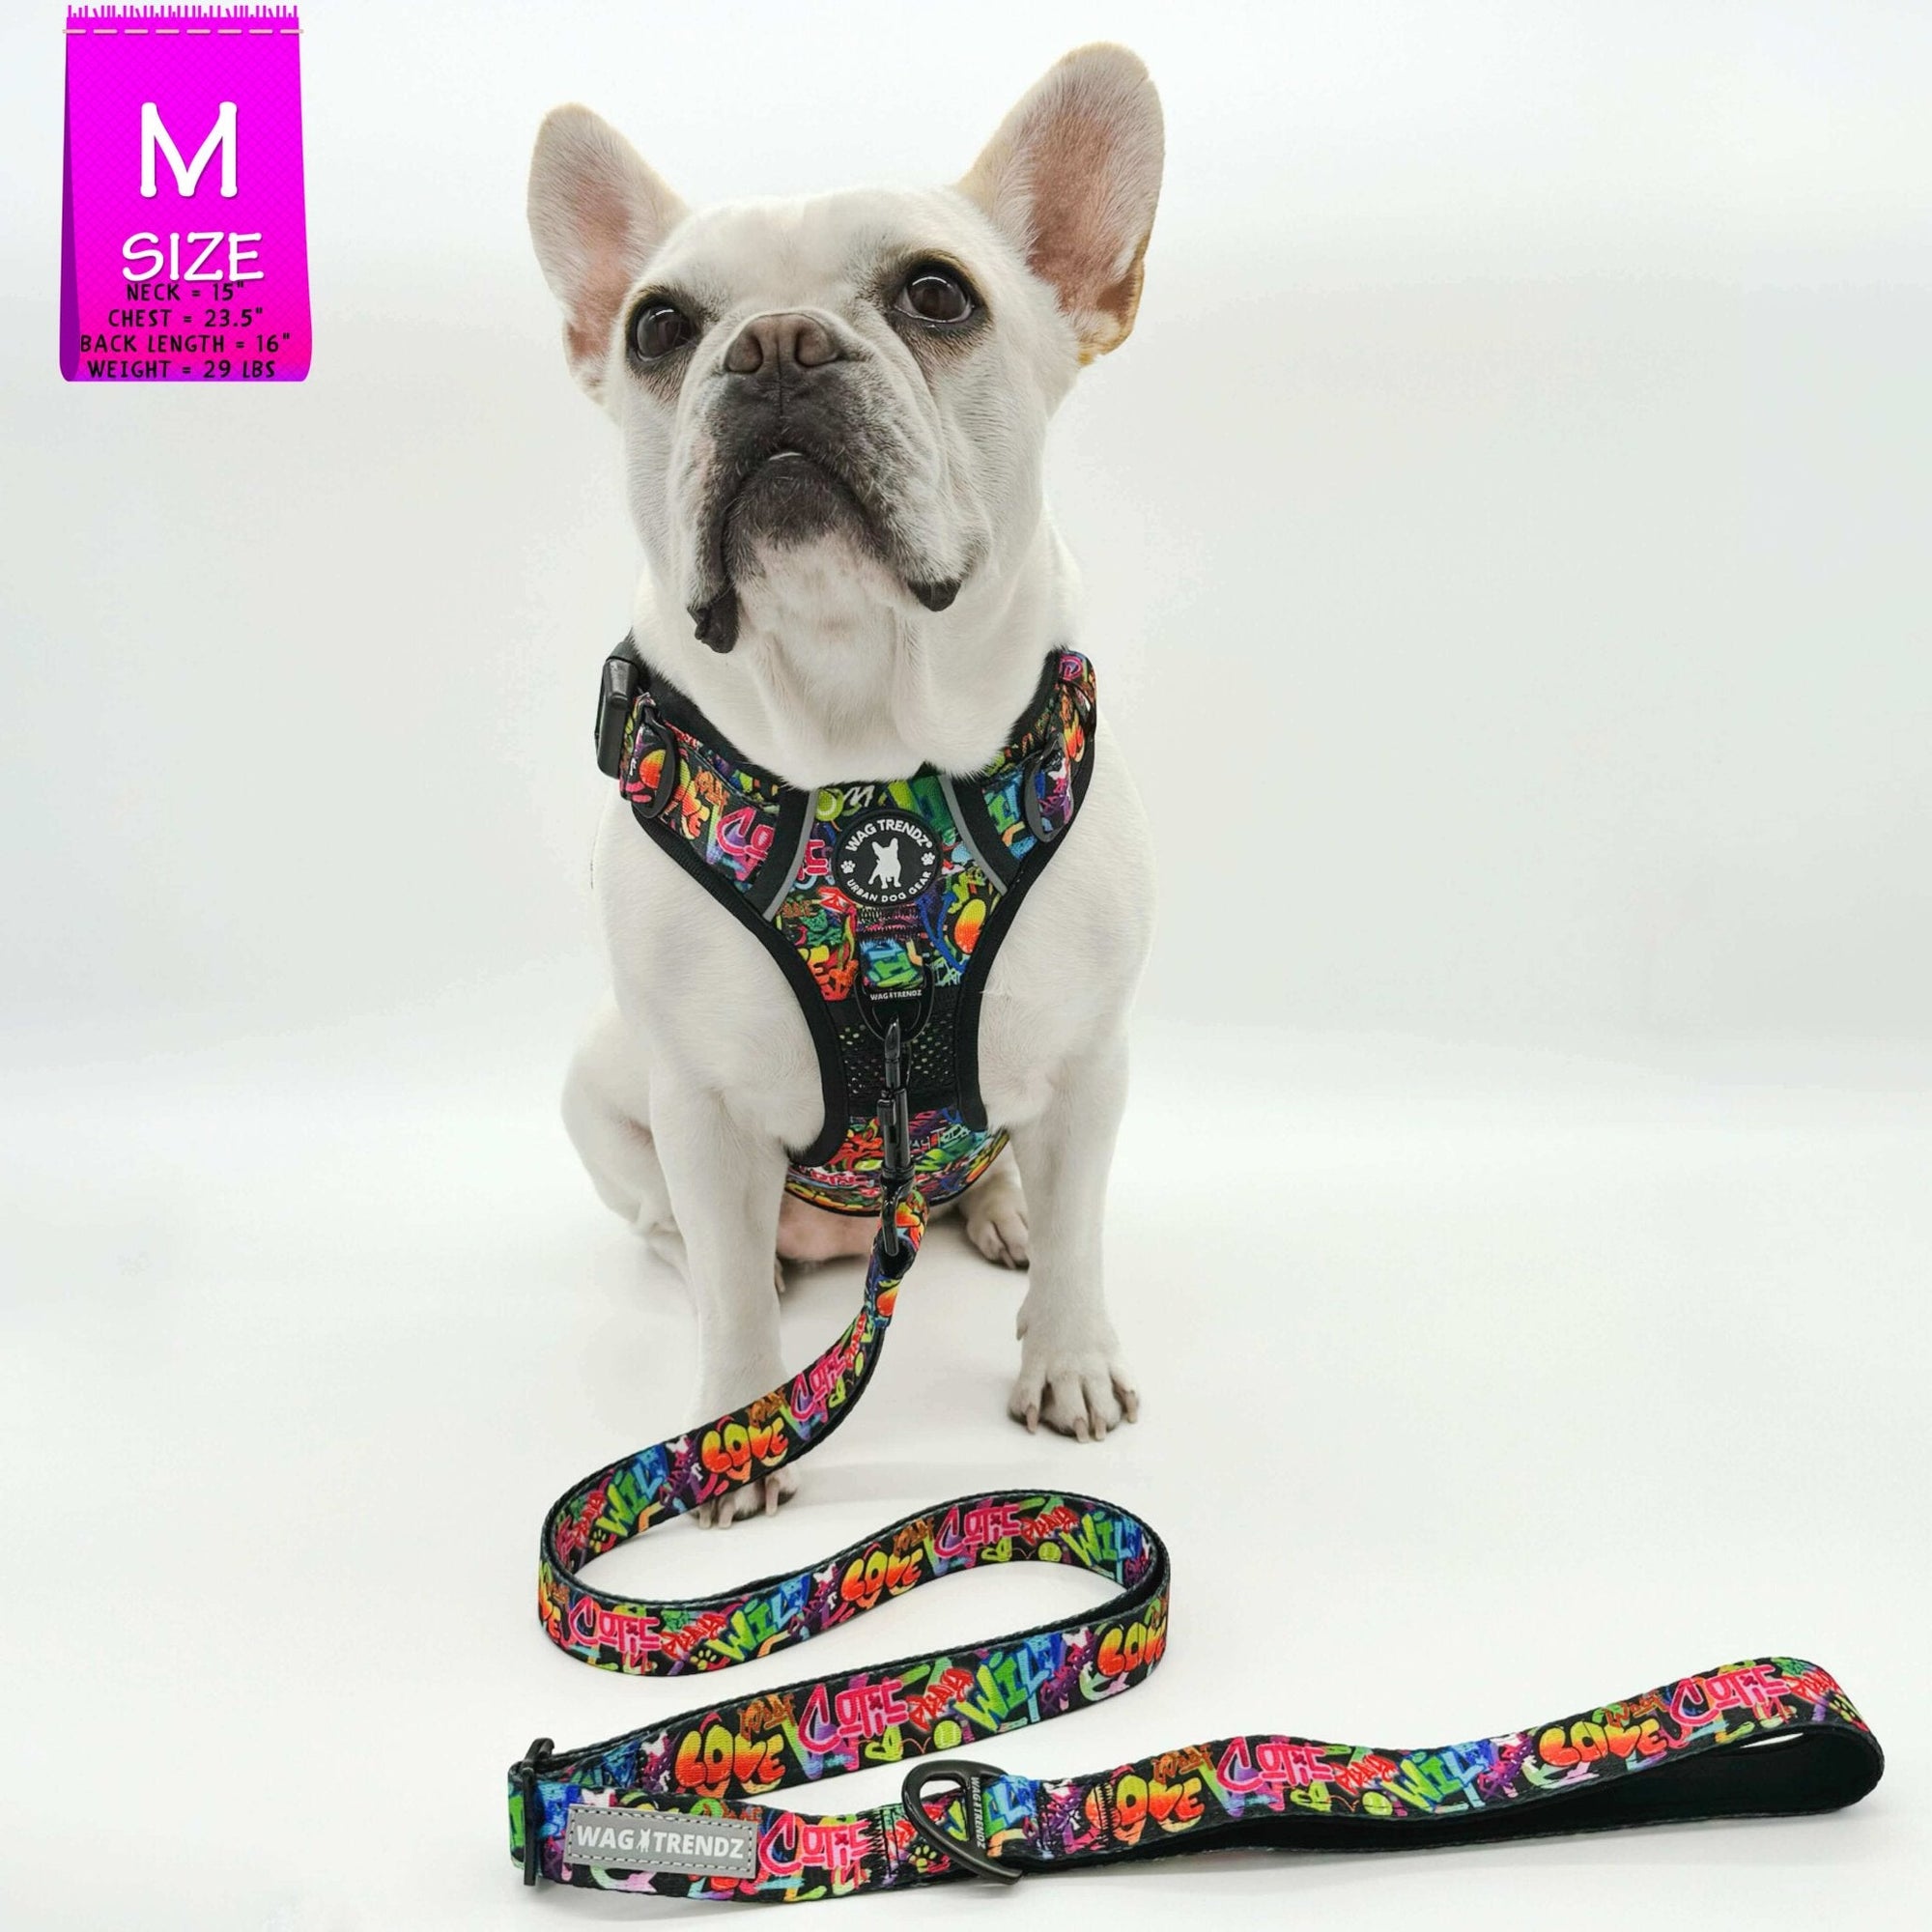 Dog Harness and Leash Set - French Bulldog wearing a medium no pull dog harness with handle - multi colored Street Graffiti - with matching adjustable leash - against solid white background - Wag Trendz